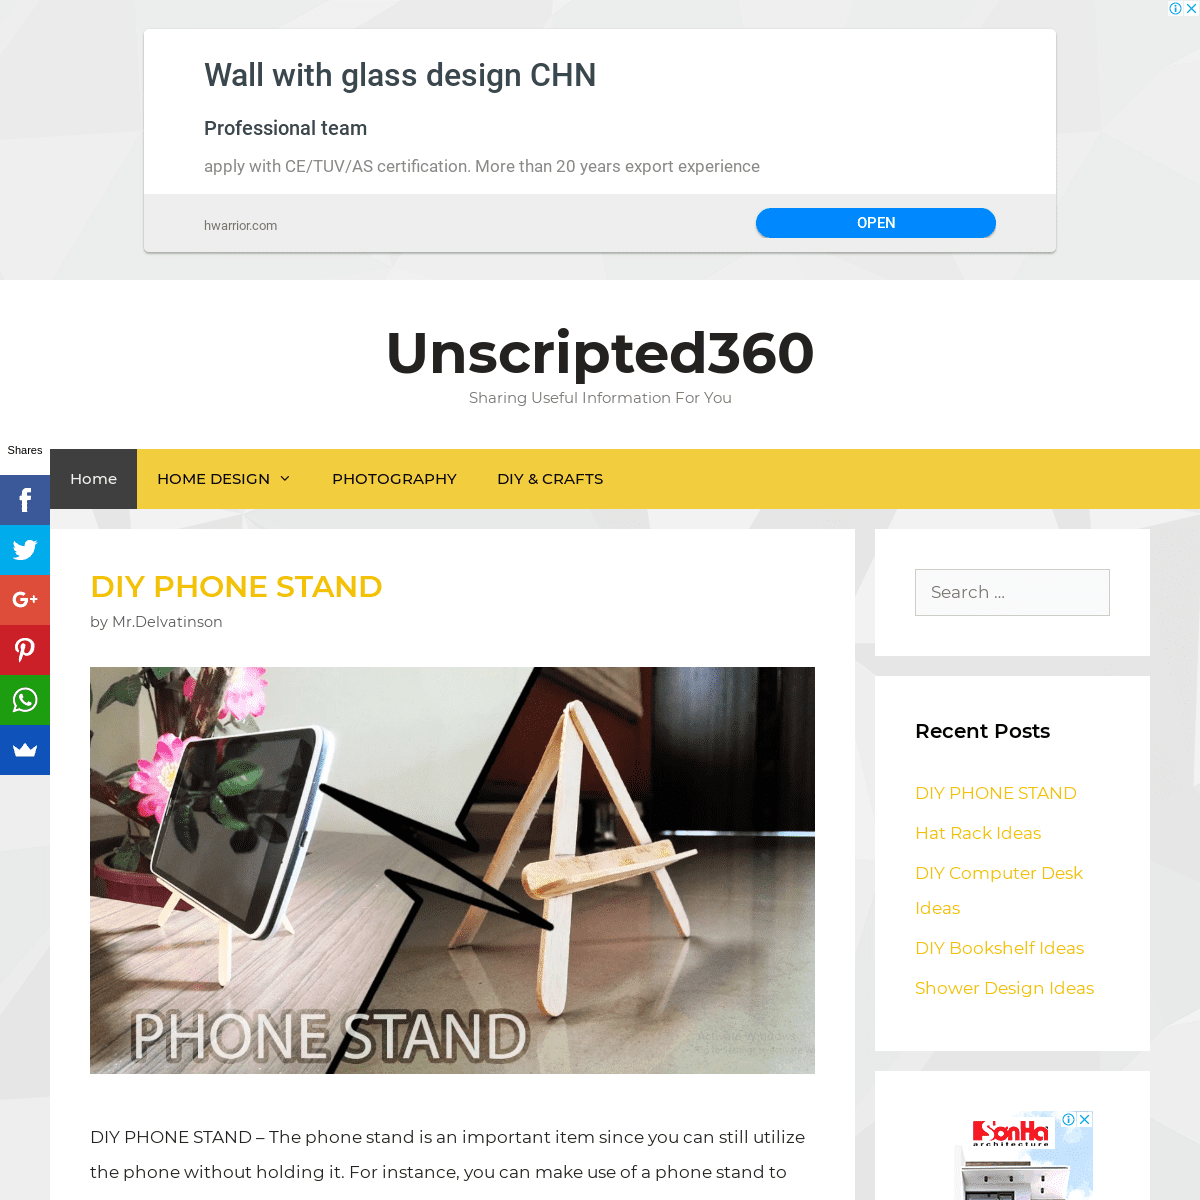 Unscripted360 - Sharing Useful Information For You